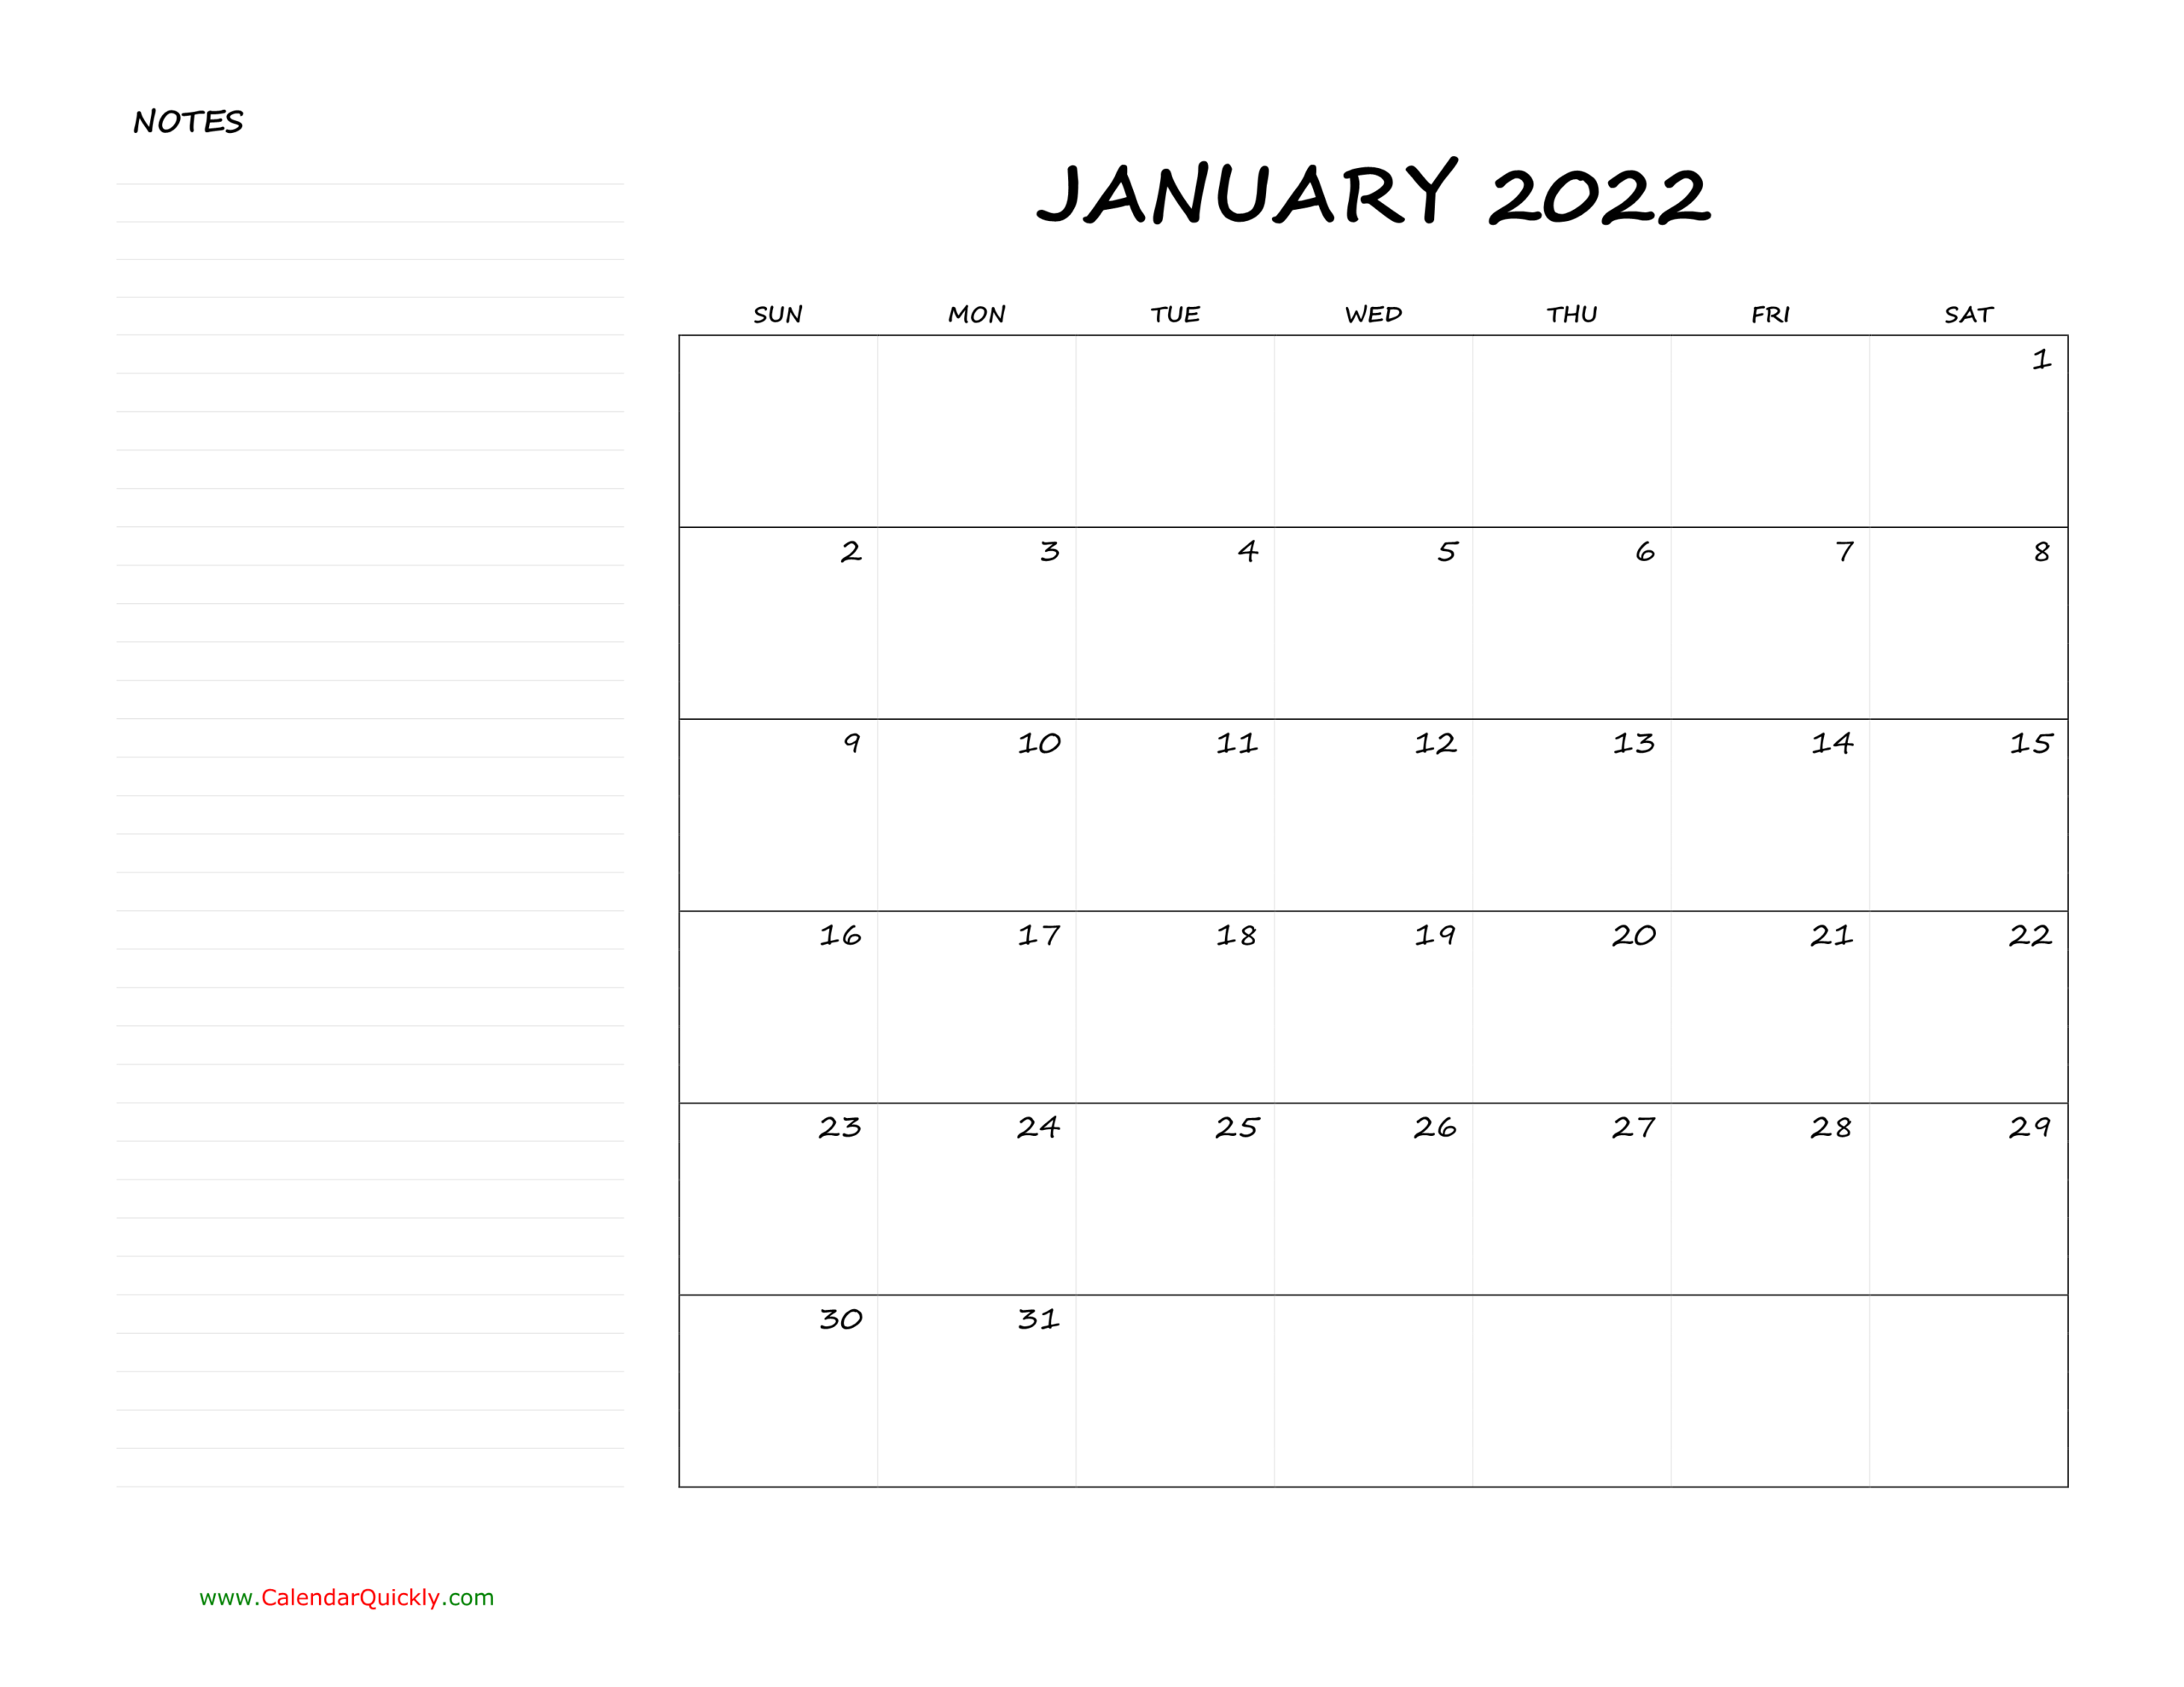 Monthly Blank Calendar 2022 With Notes | Calendar Quickly within Next Year Calendar 2022